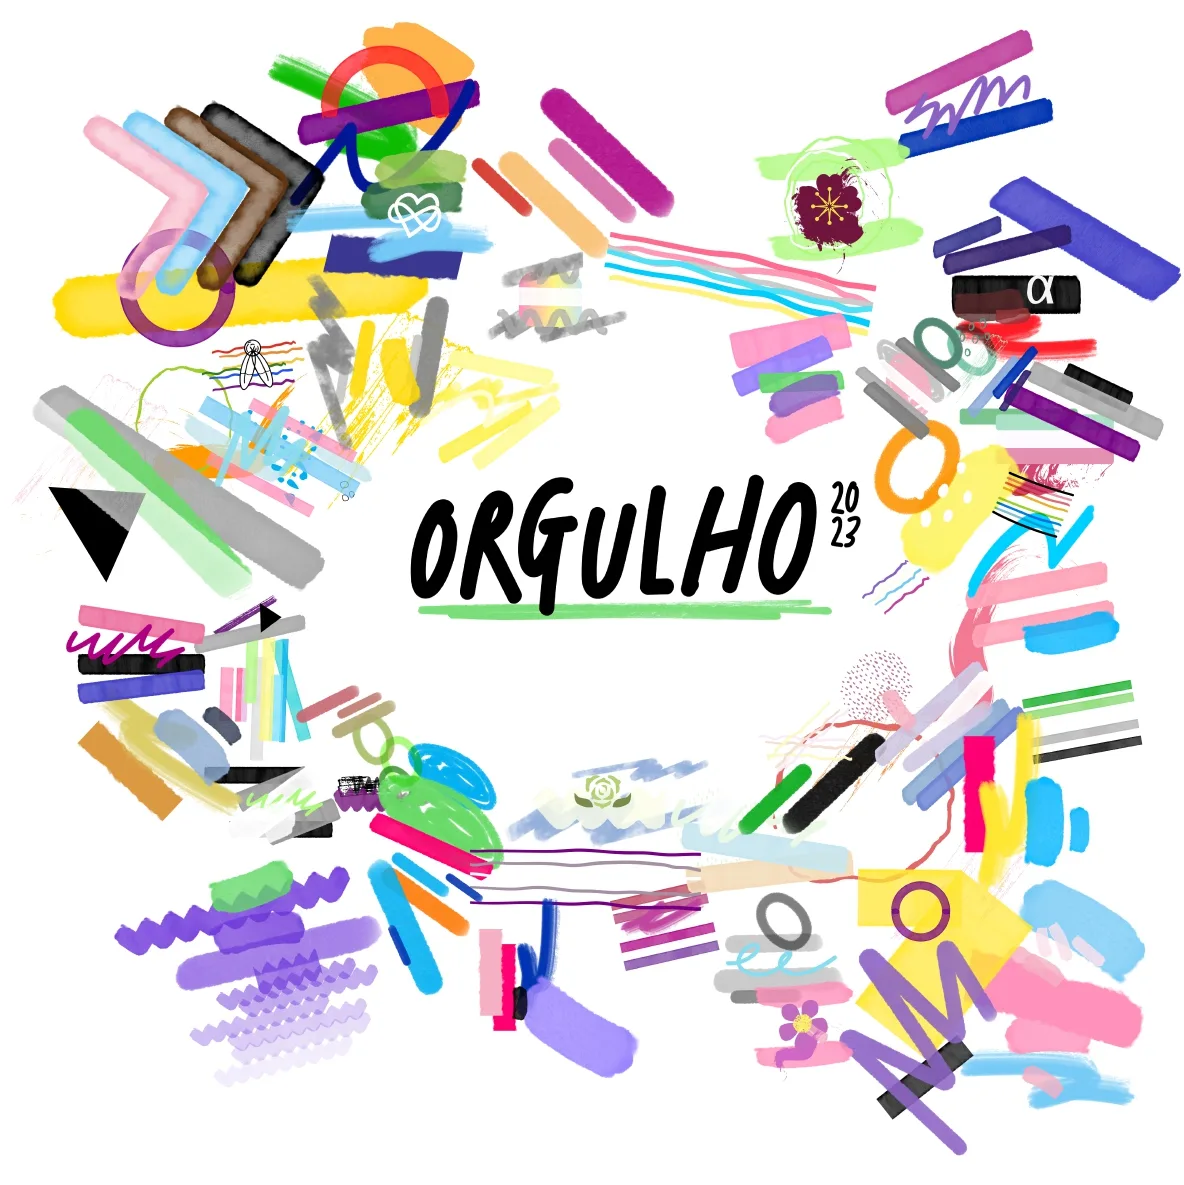 Orgulho's logo is surrounded by a variety of colorful objects.